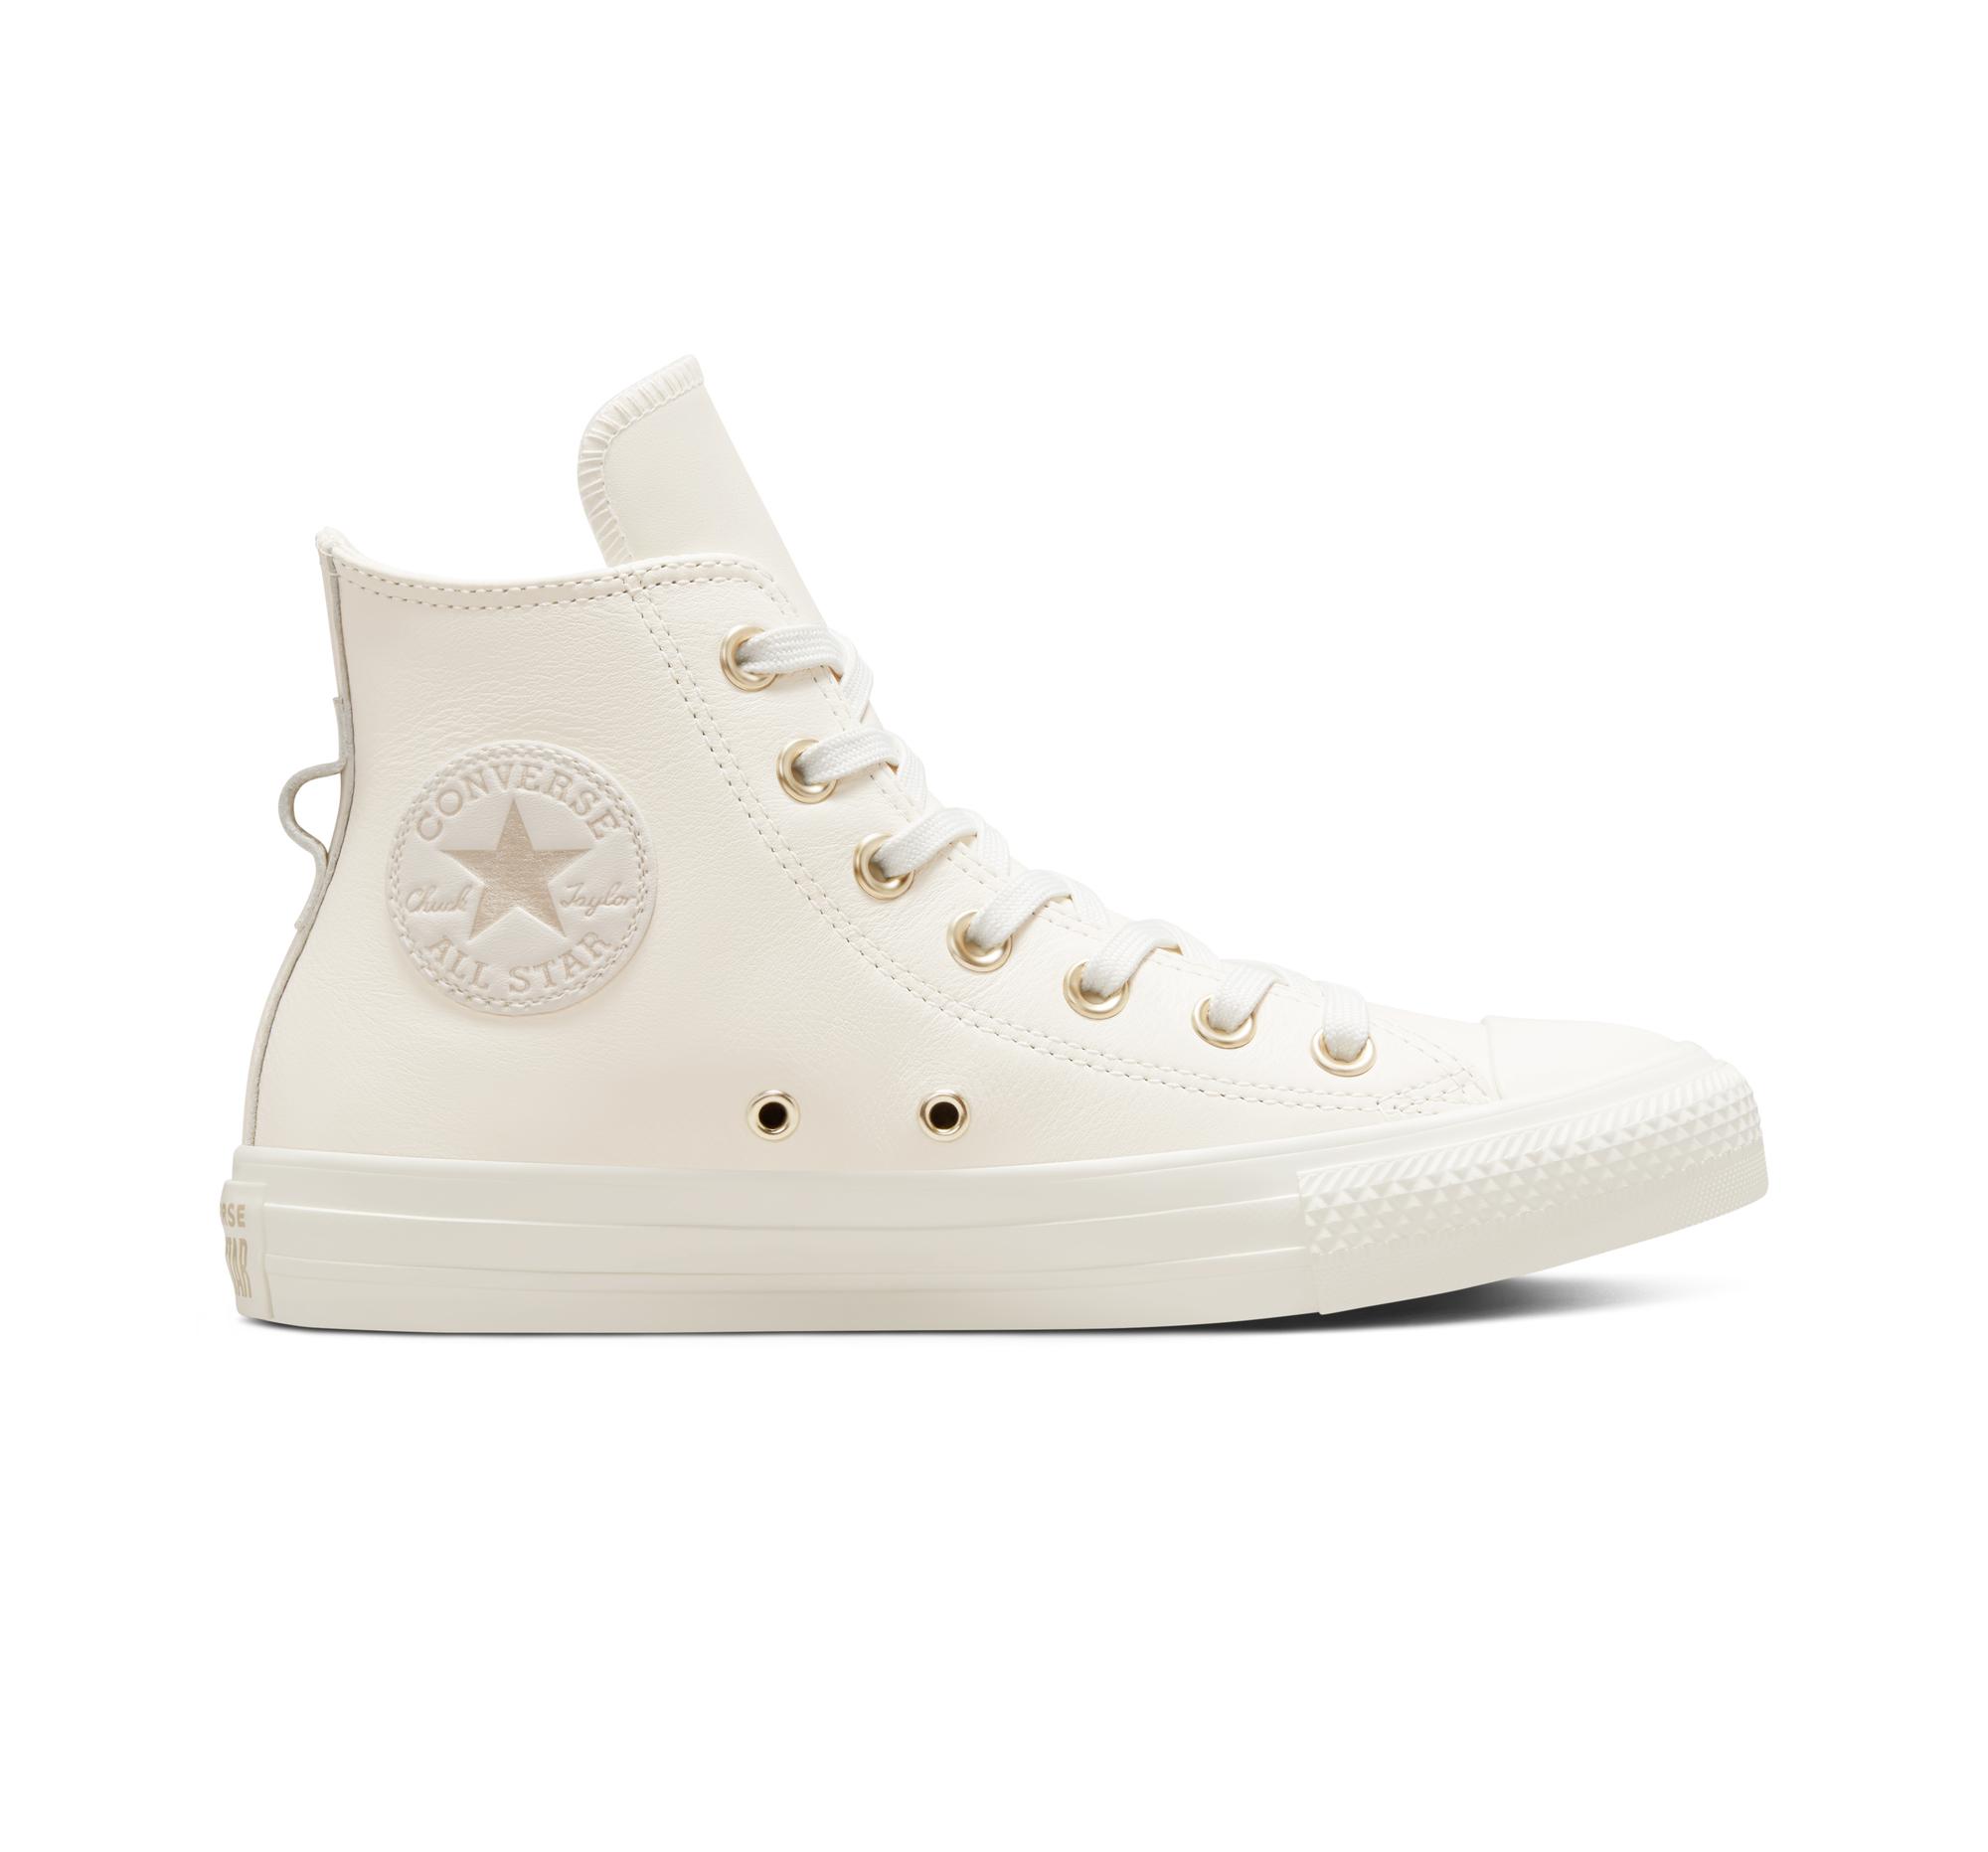 Converse Earthy Tones Chuck Taylor All Star in White | Lyst